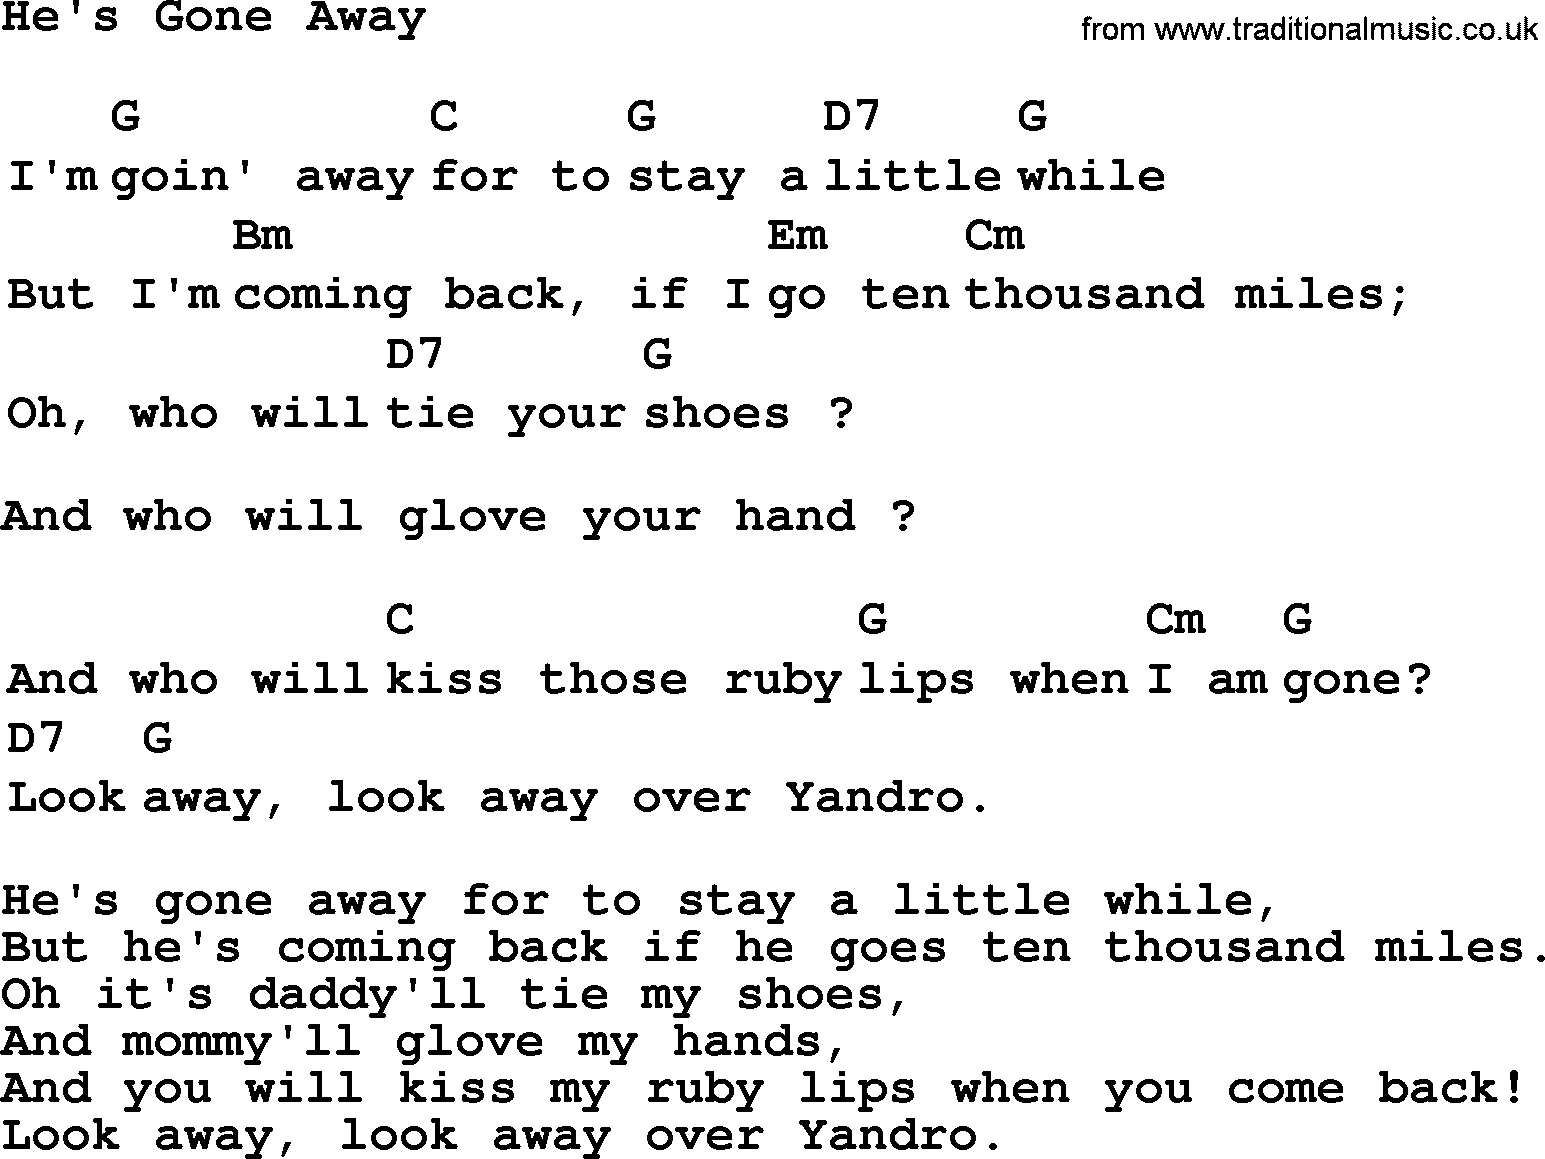 Top 1000 Most Popular Folk and Old-time Songs: Hes Gone Away, lyrics and chords